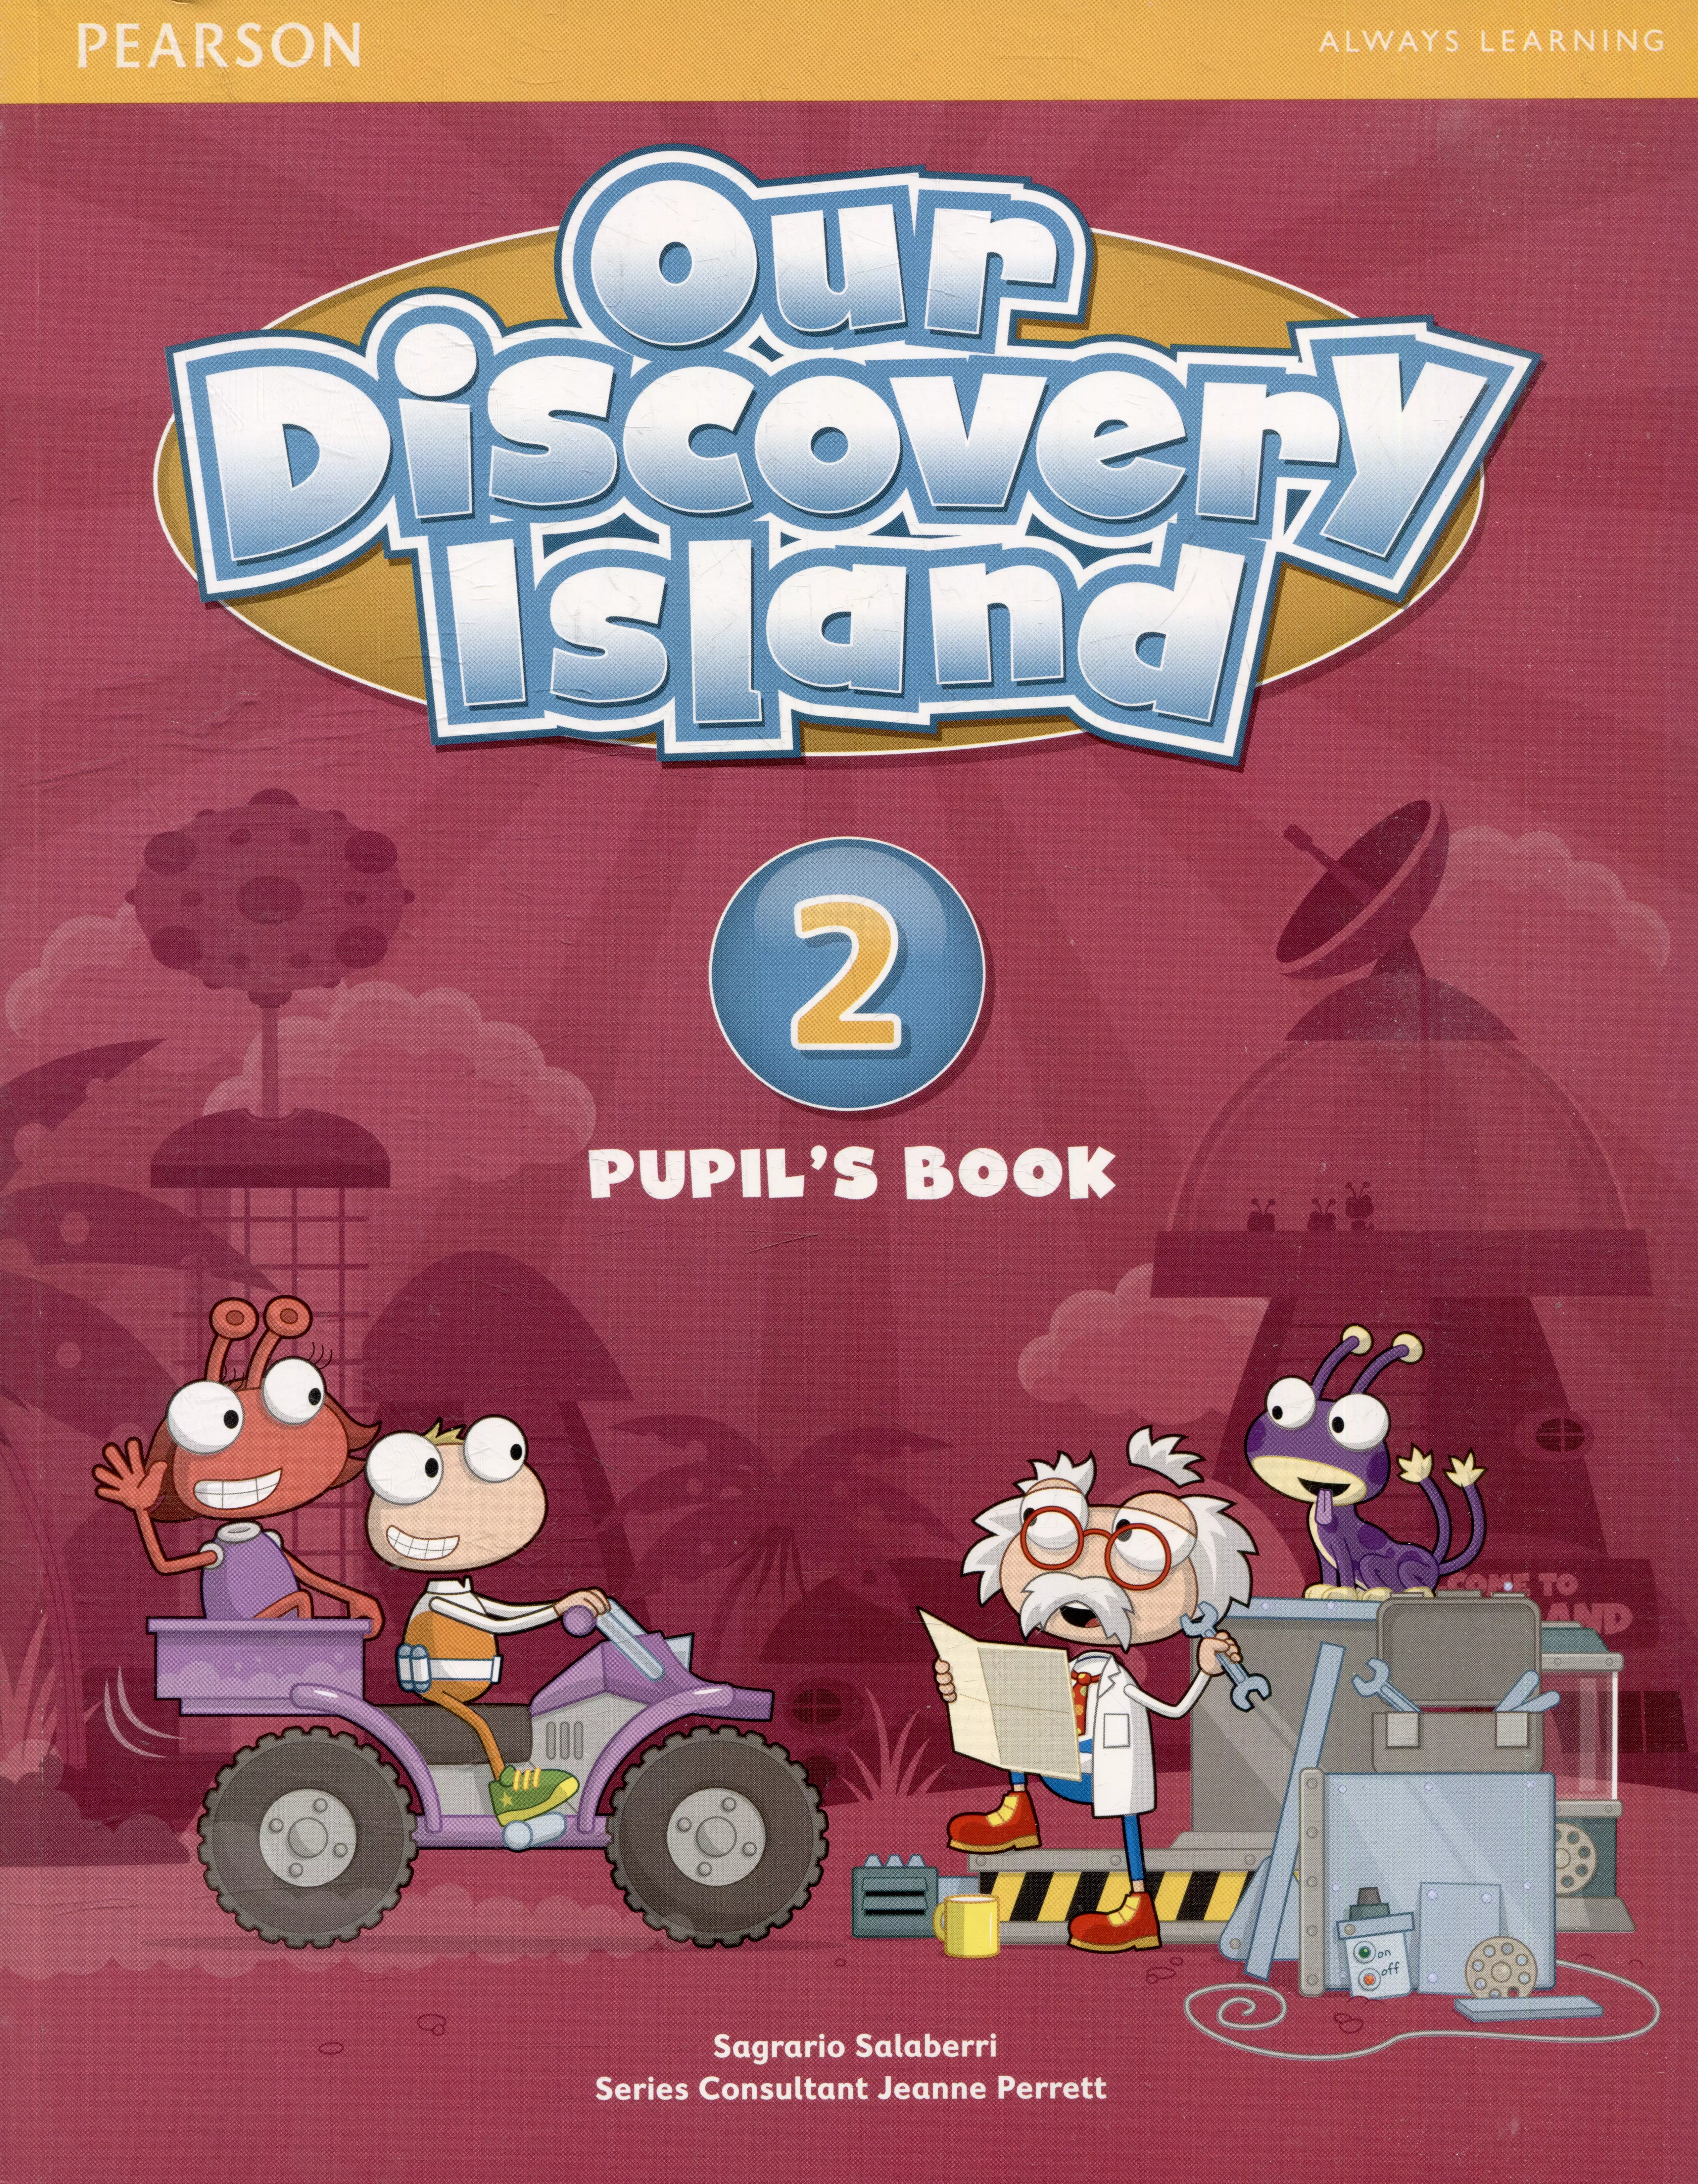 roderick megan our discovery island 5 student s book pin code Our Discovery Island. Level 2. Students Book (+Pin Code)